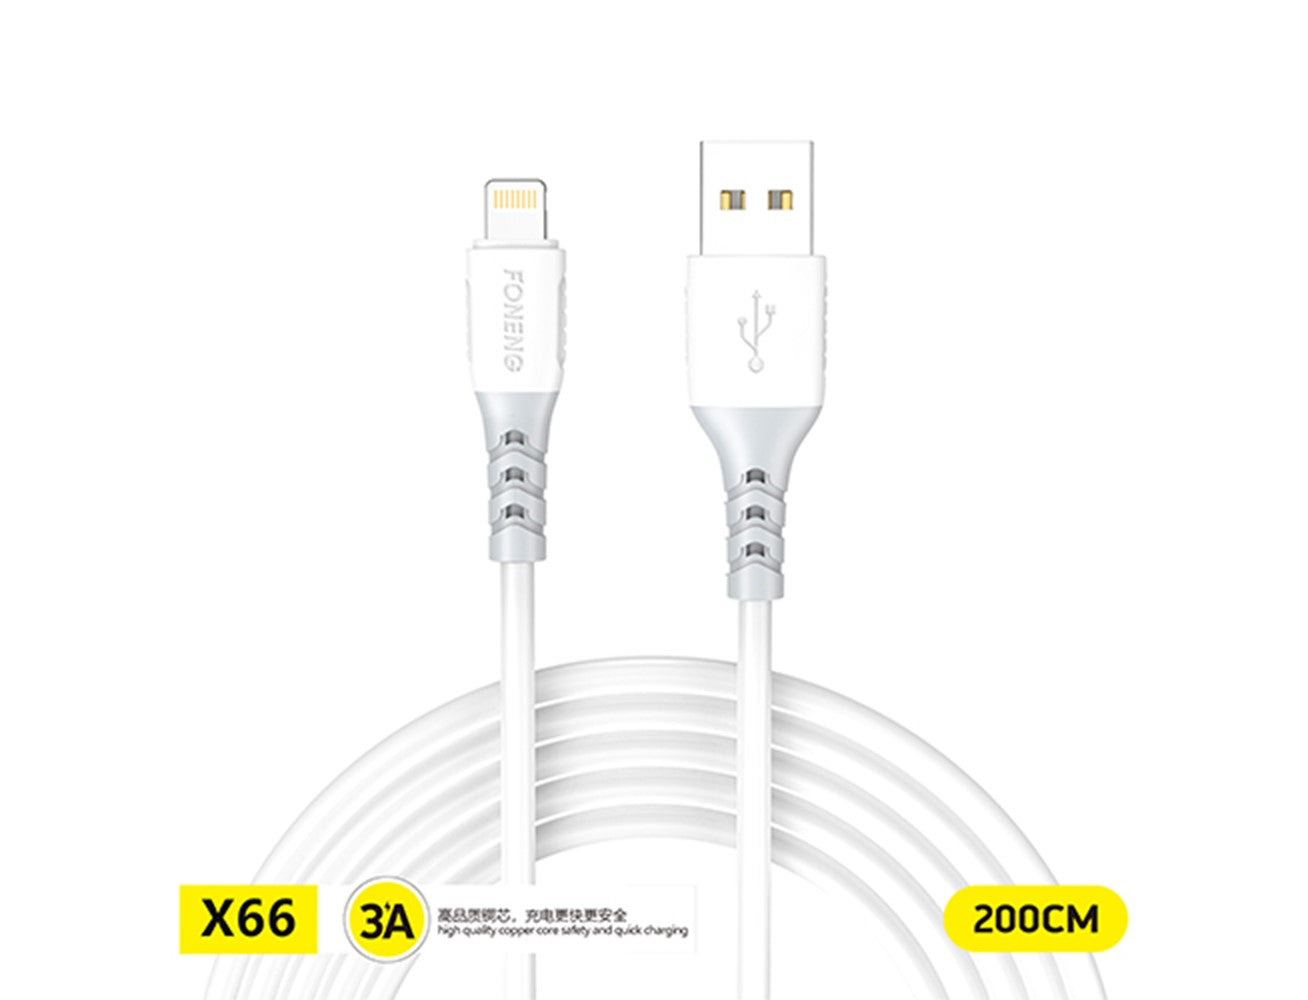 Foneng X66 Qc 2M Fast 3A Lightning Data Cable - White